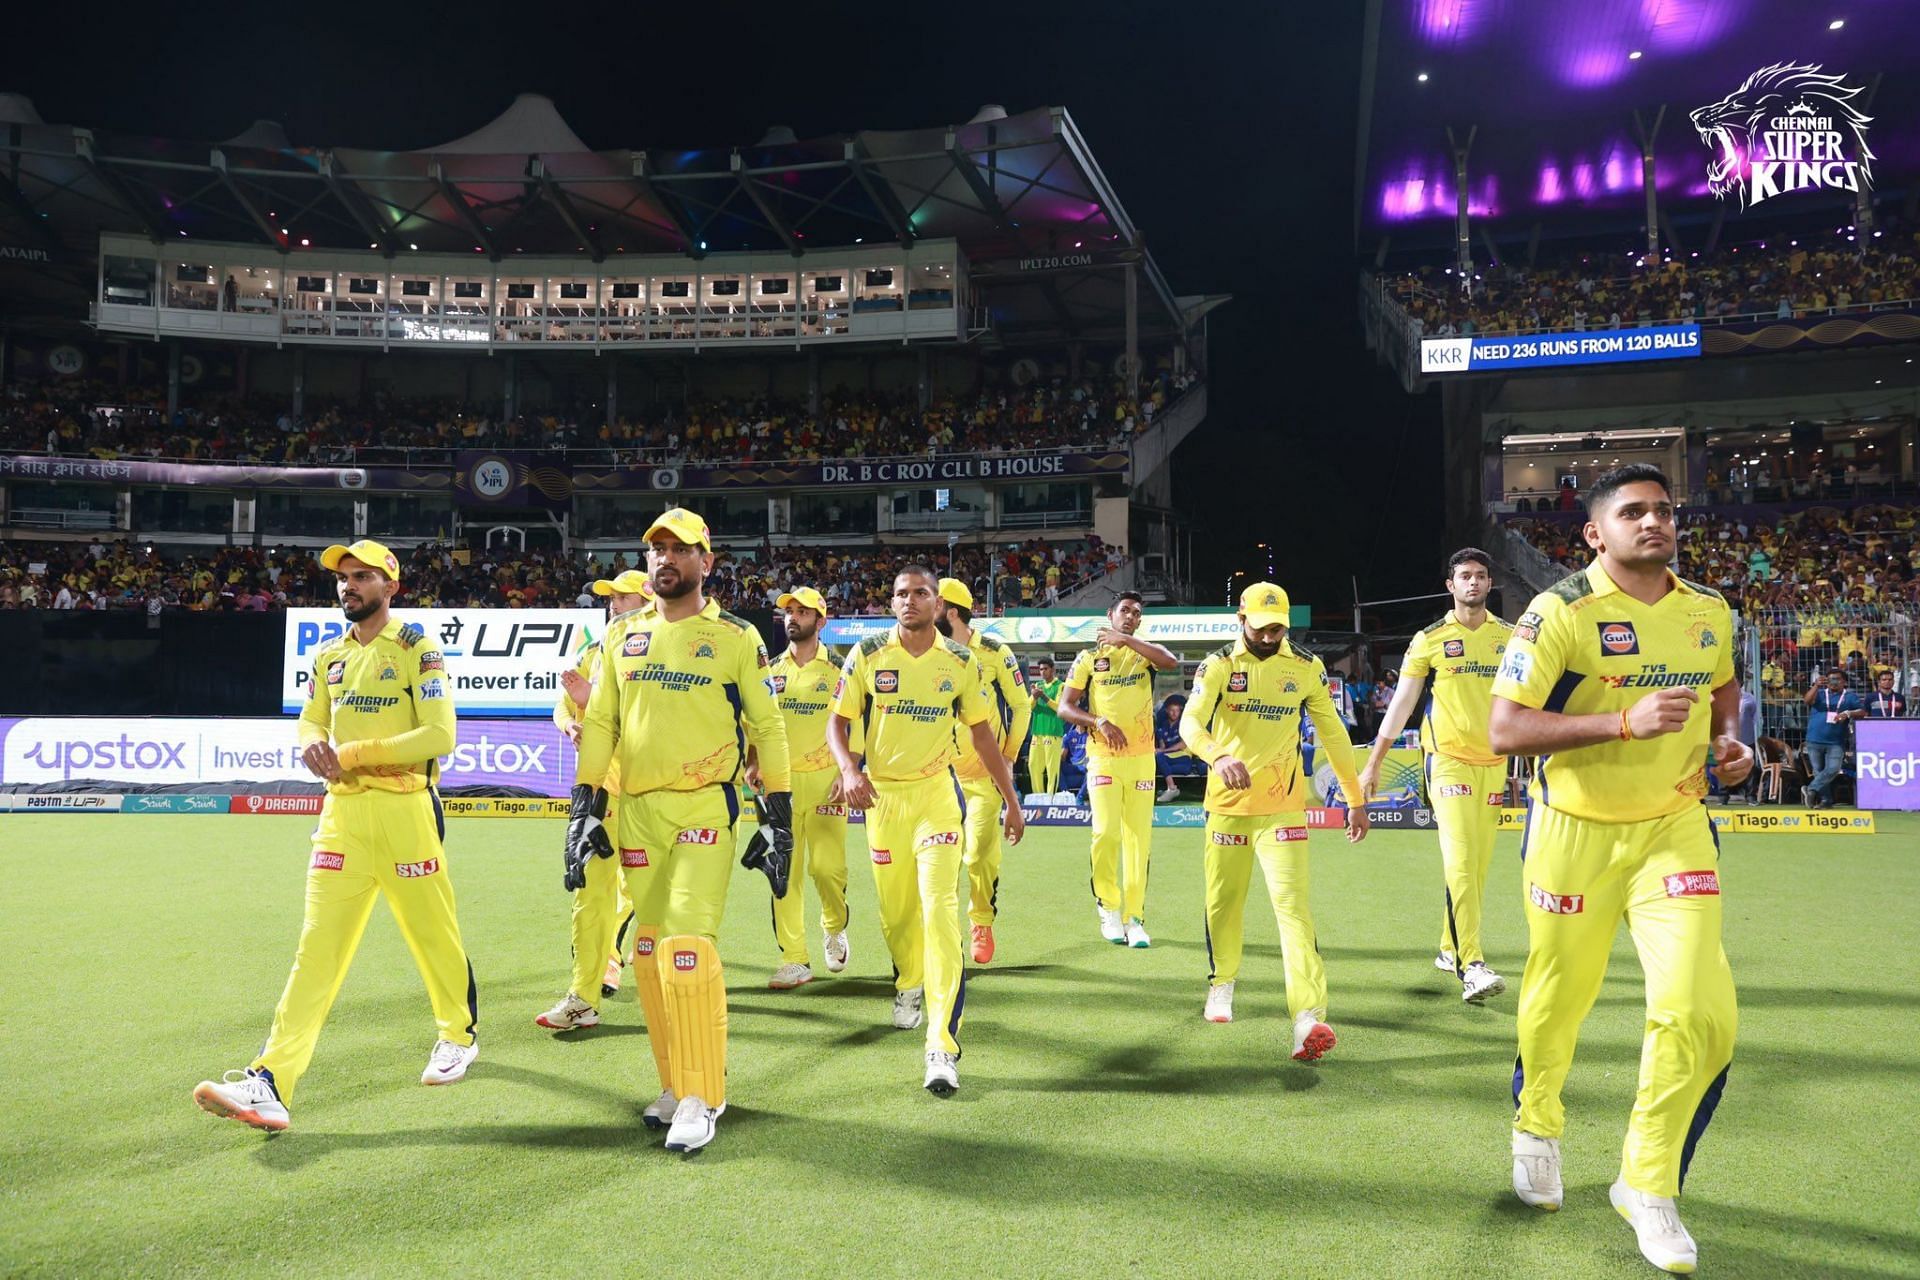 CSK has been the fan favorite among the IPL teams. Pic: Twitter/@ChennaiIPL